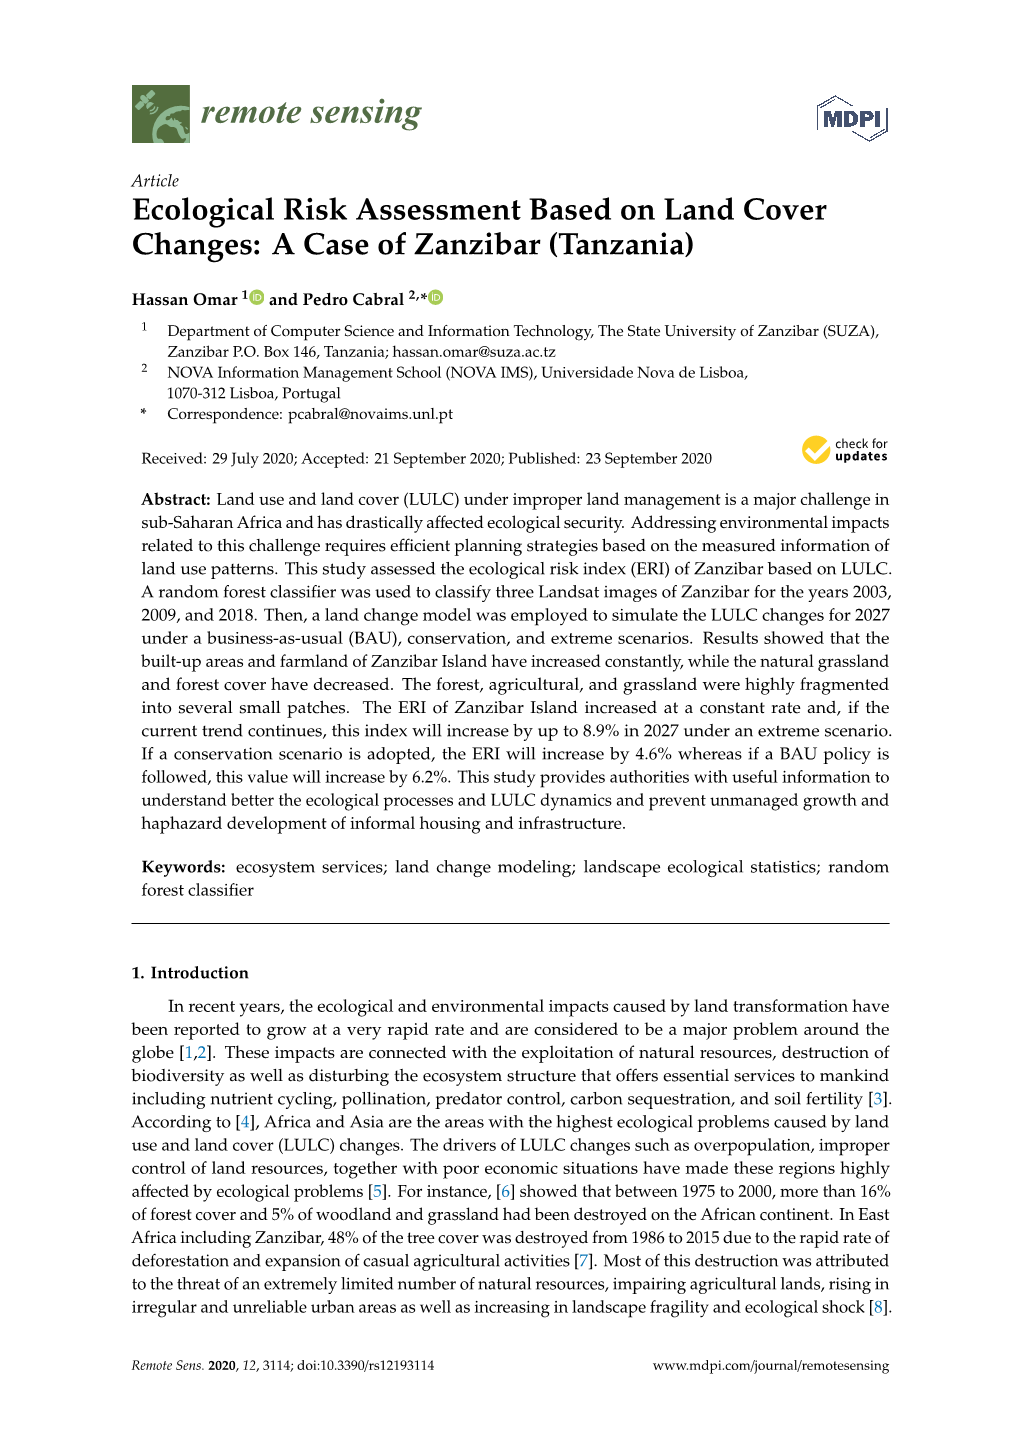 Ecological Risk Assessment Based on Land Cover Changes: a Case of Zanzibar (Tanzania)